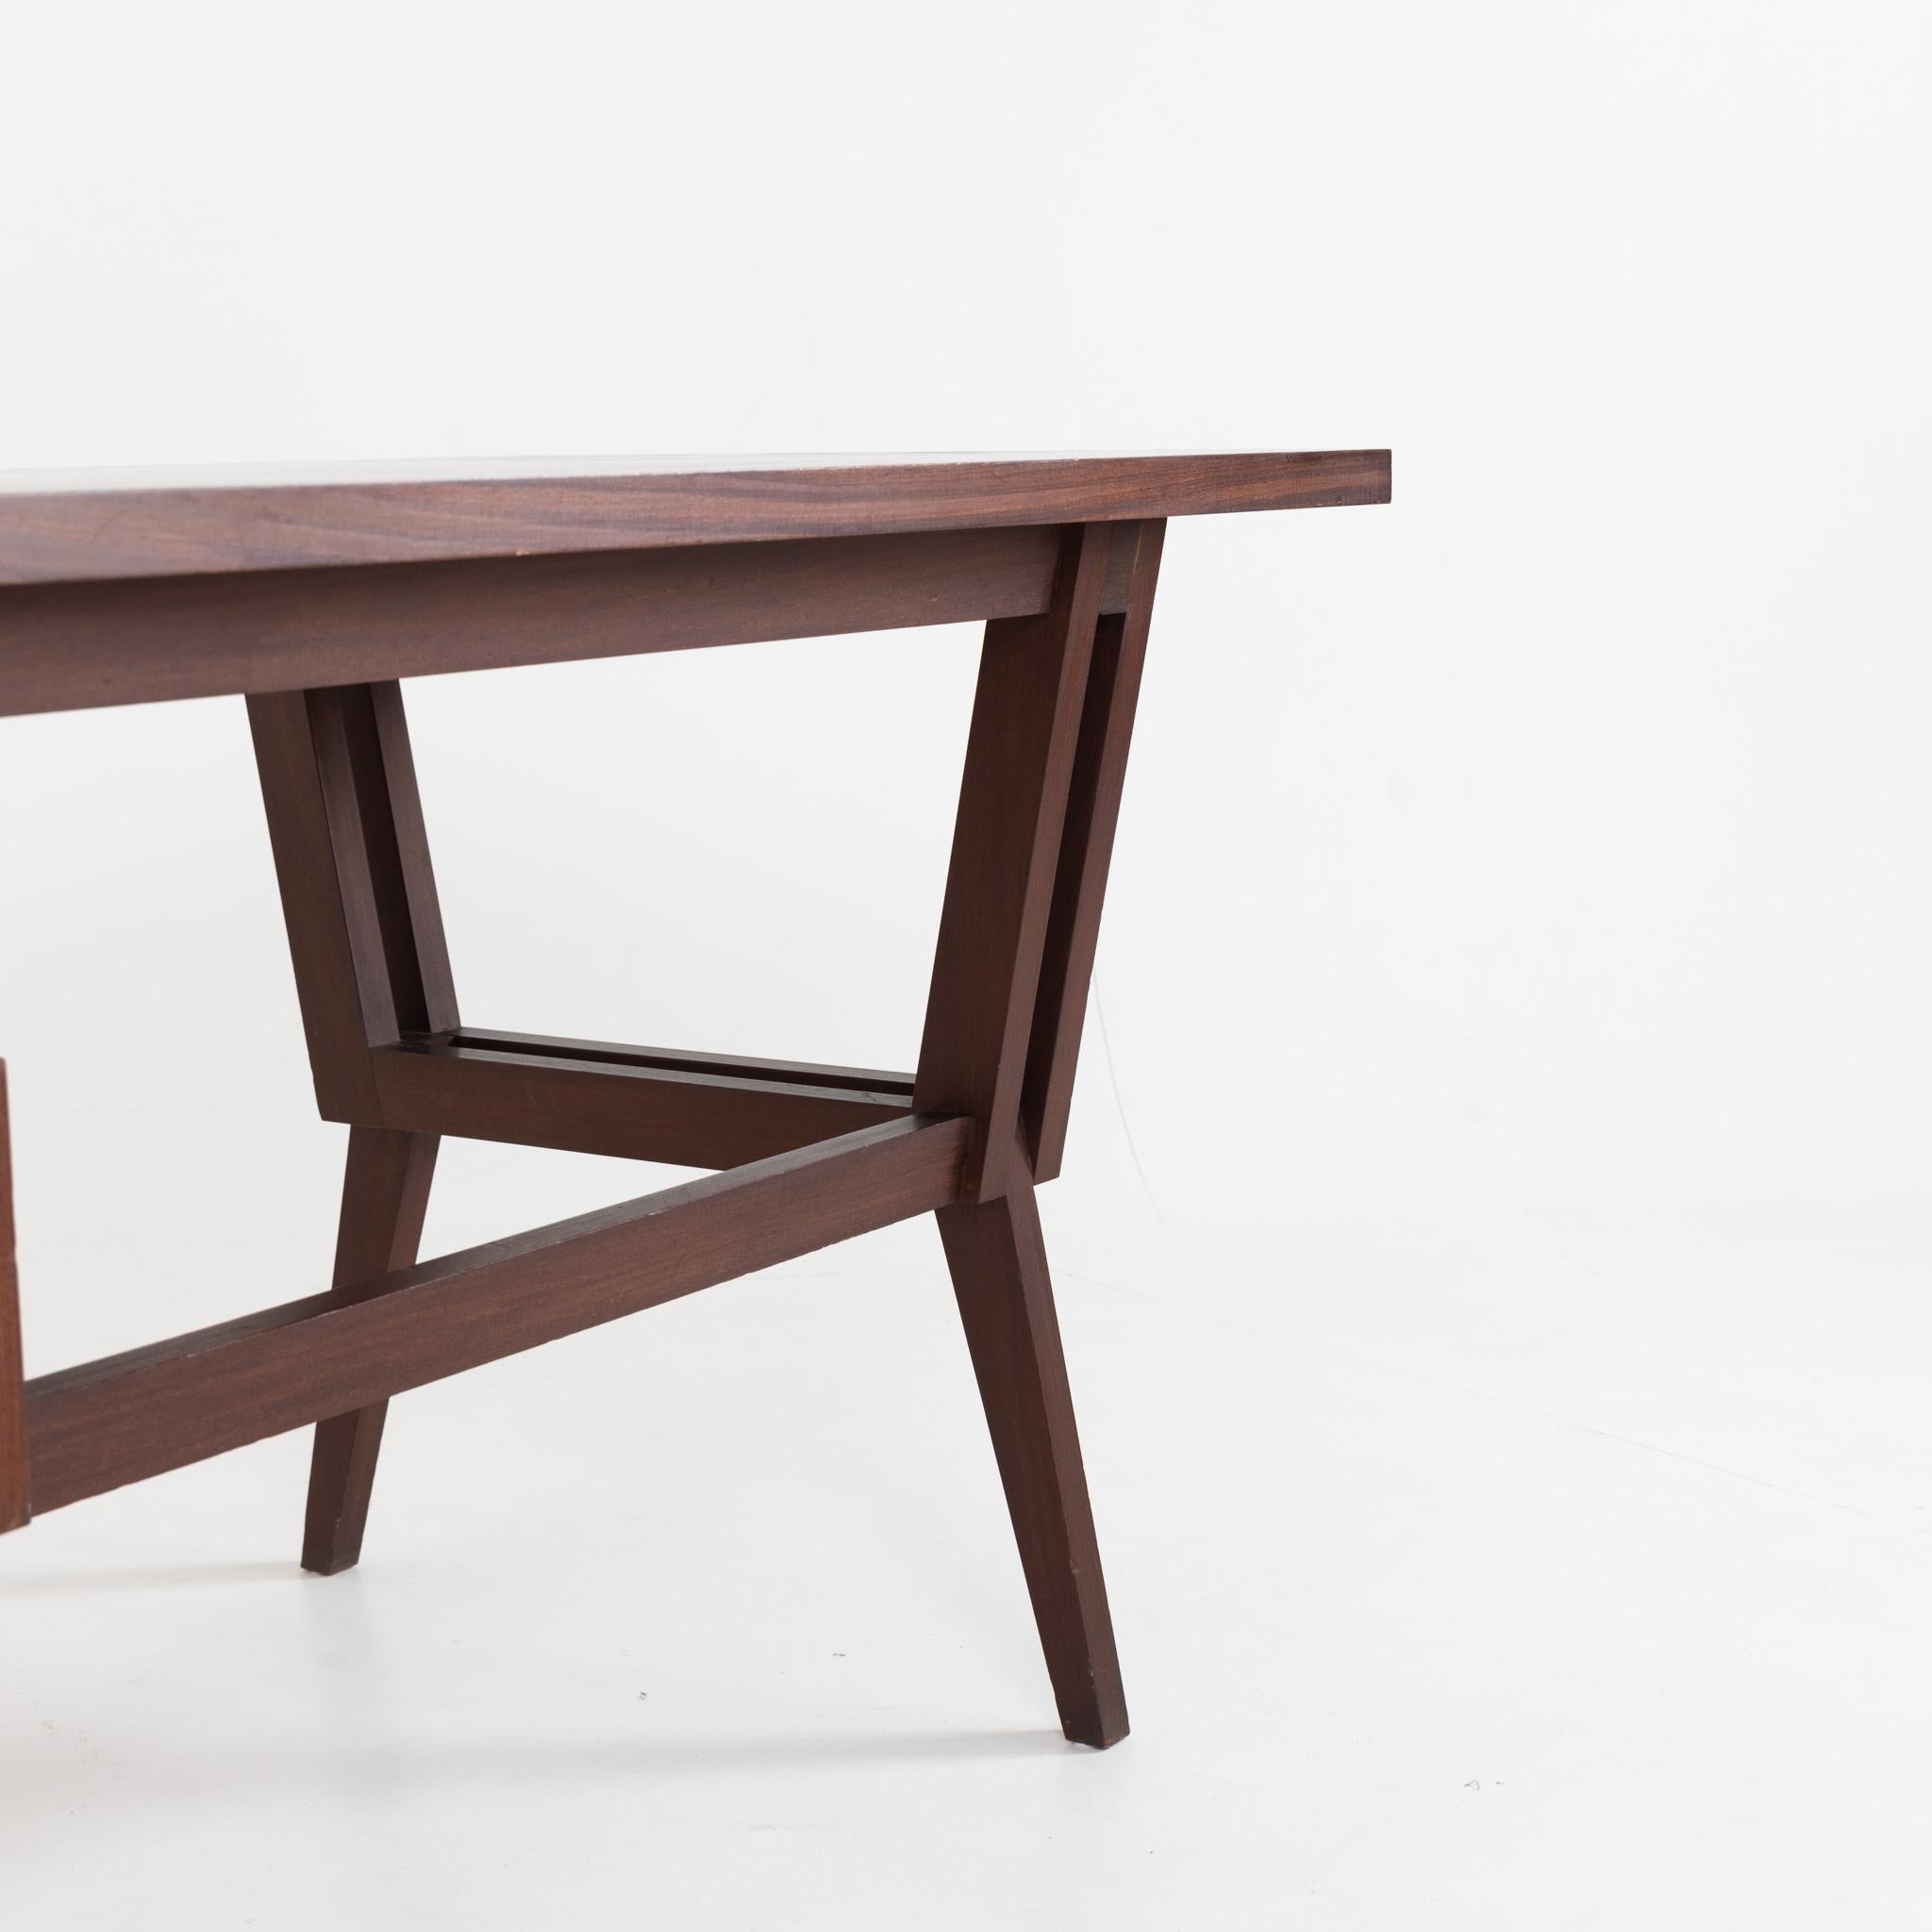 20th Century Desk in the style of Ico Parisi, Italy 1950s